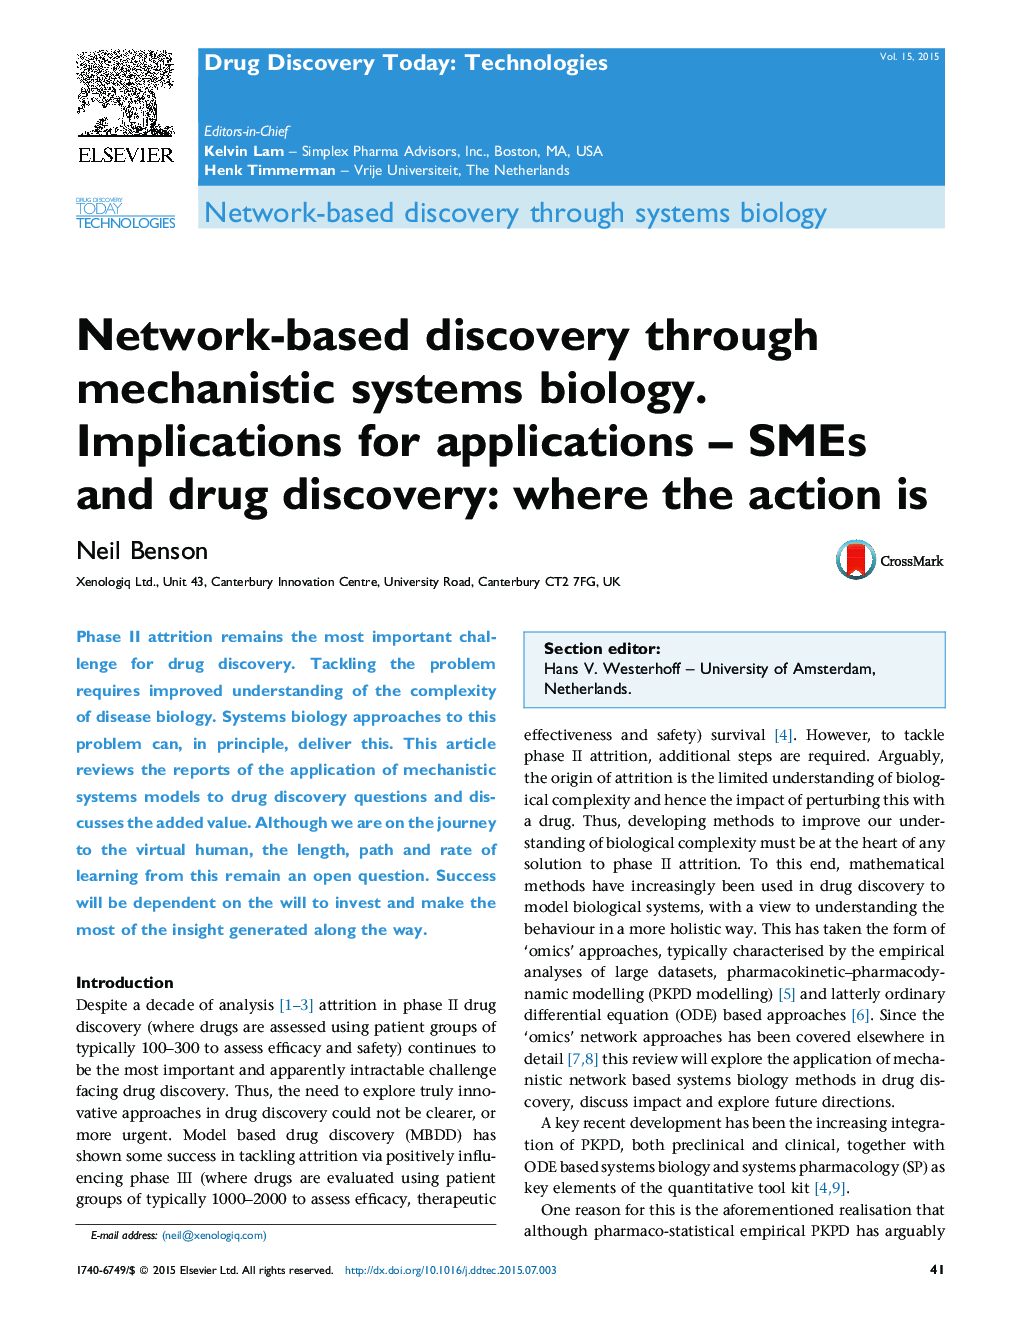 Network-based discovery through mechanistic systems biology. Implications for applications – SMEs and drug discovery: where the action is